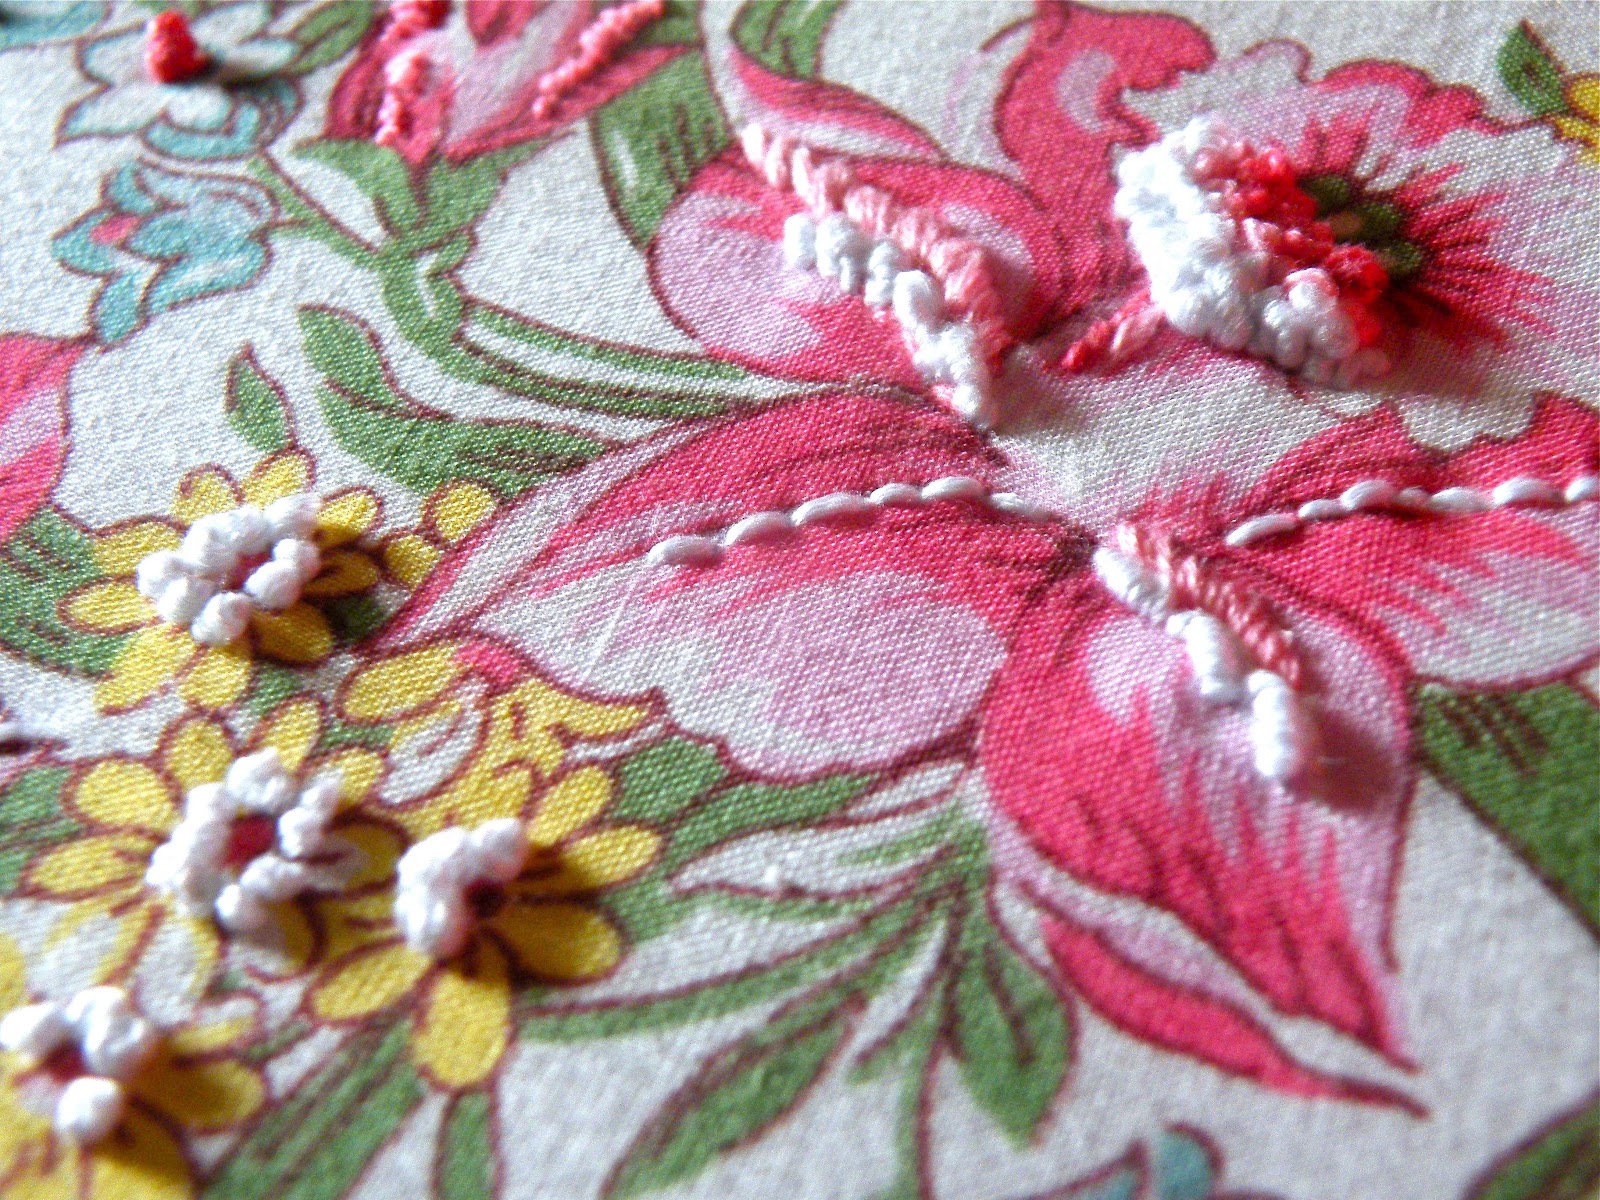 ModernJune Playing around on Pinterest  Embroidery 